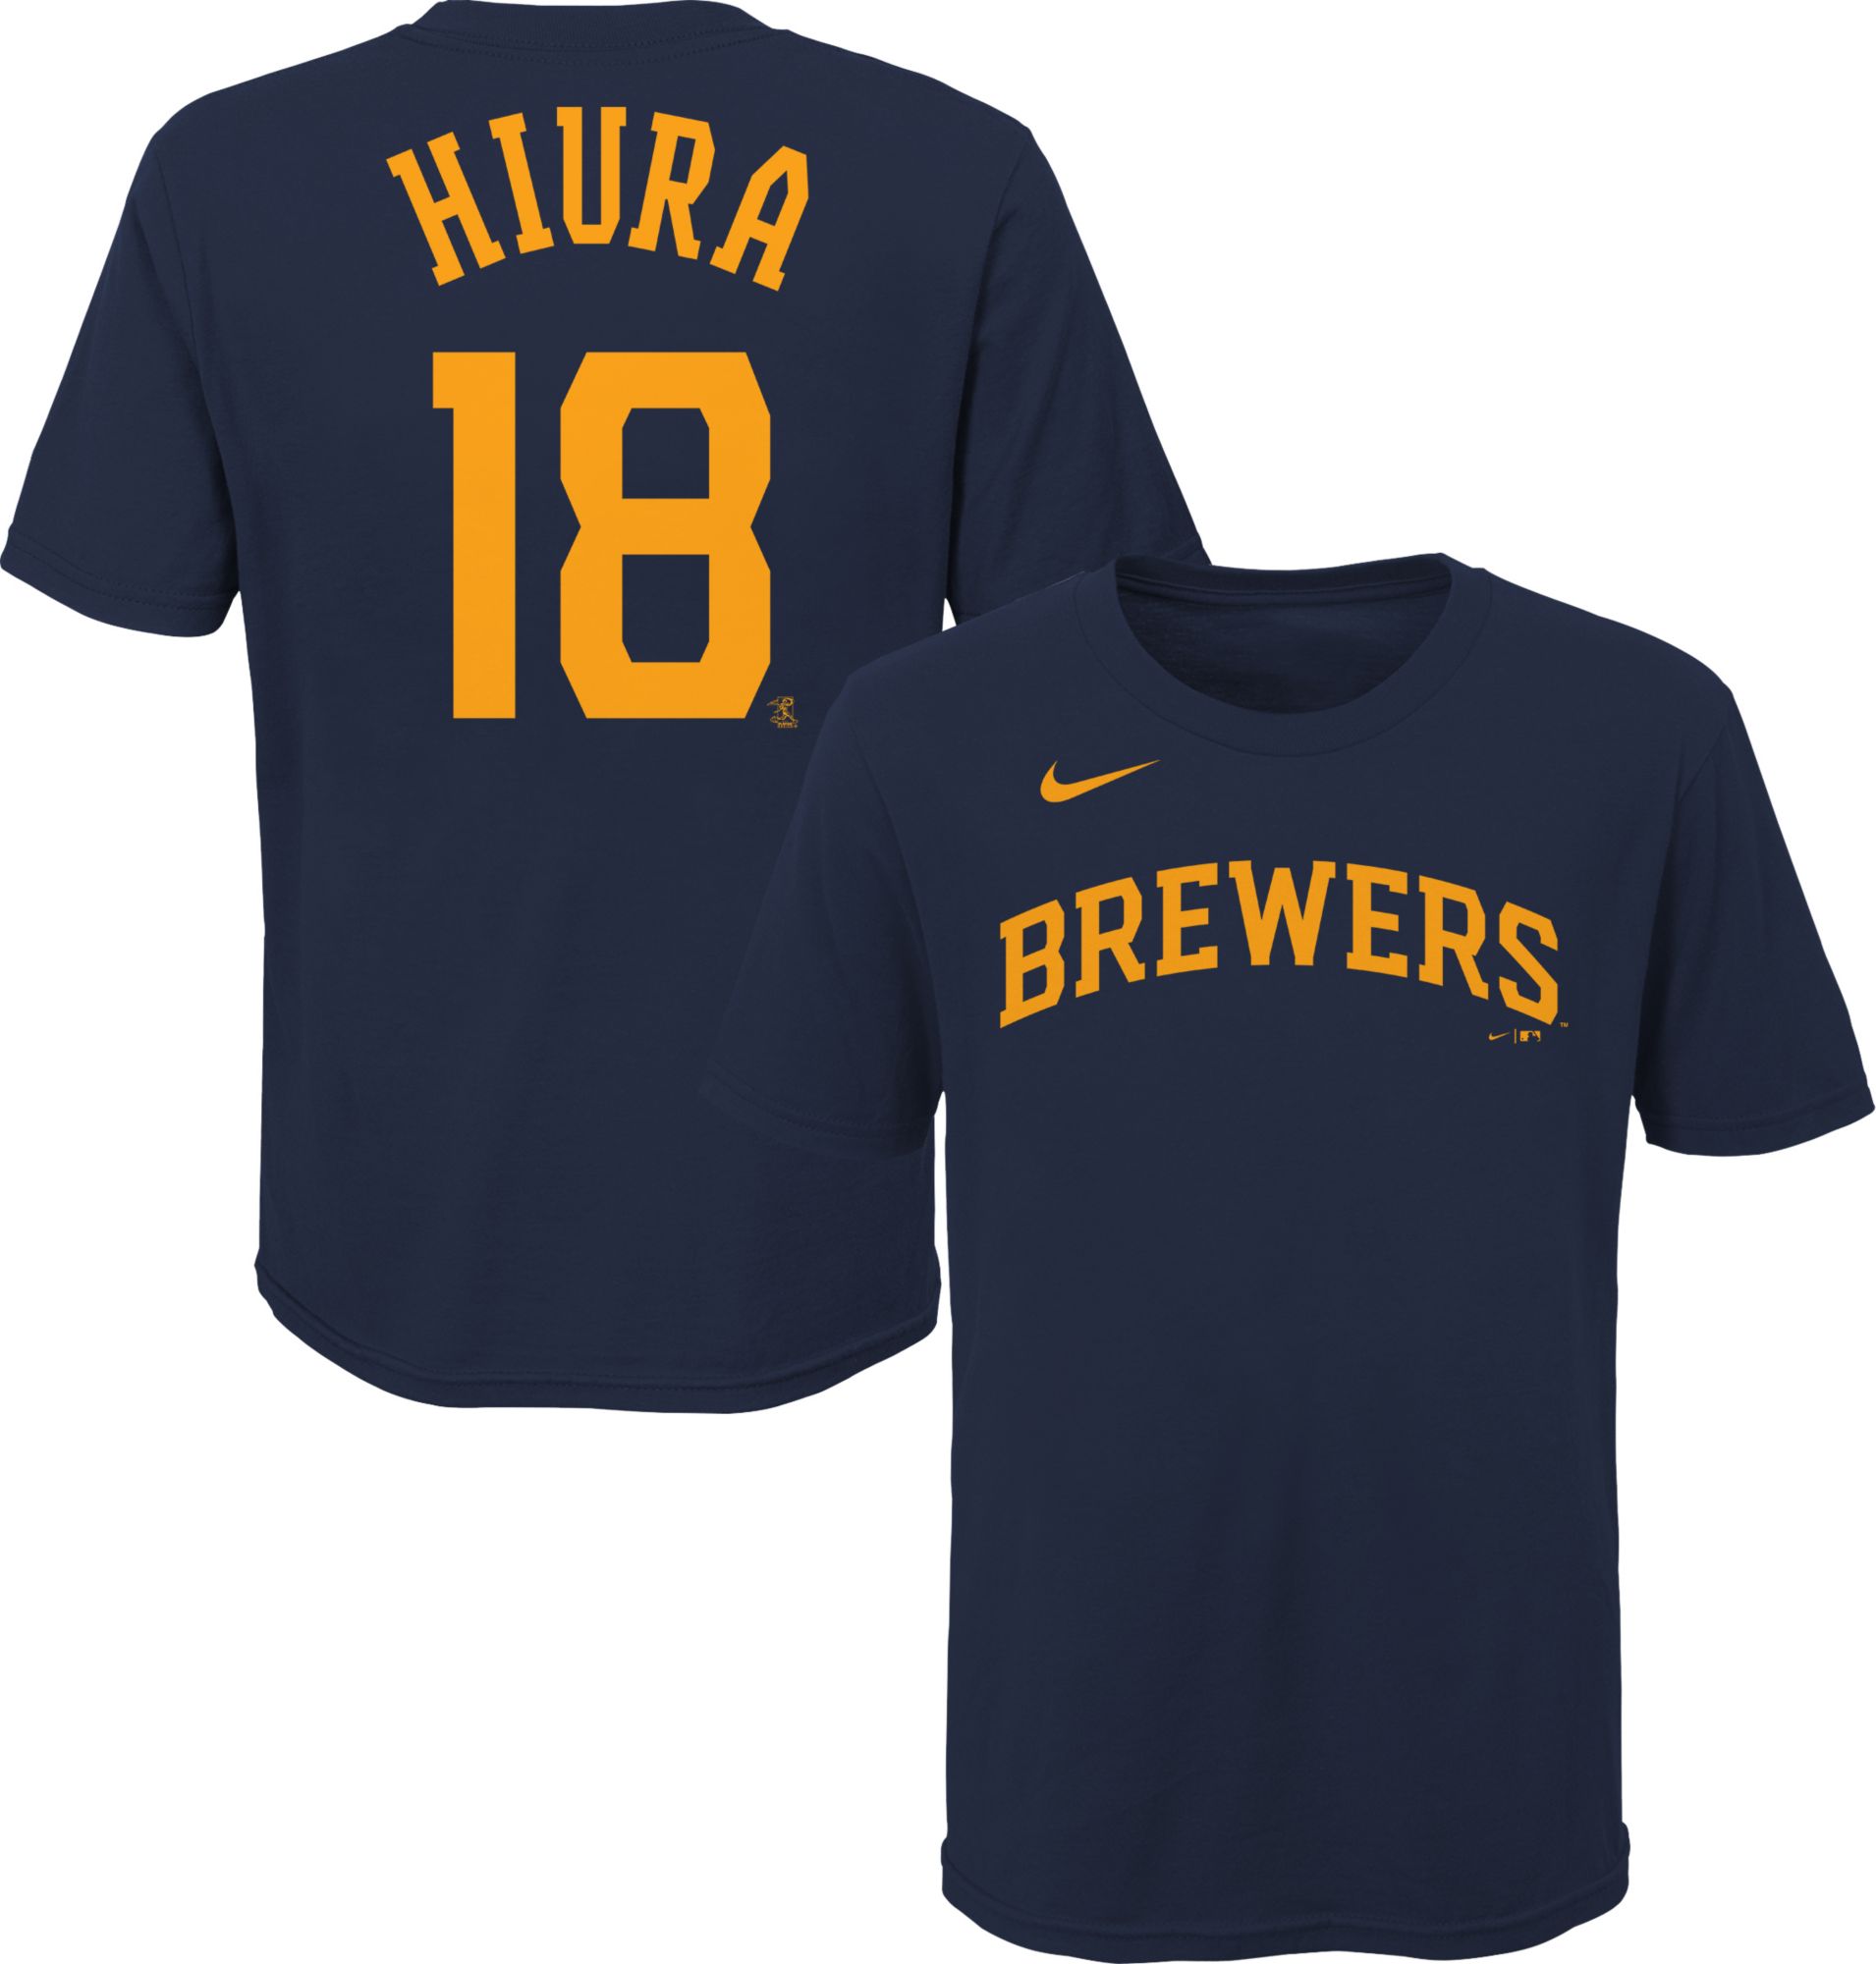 MLB Boys Youth 8-20 Team Color Official Player Name & Number T-Shirt  (Christian Yelich Milwaukee Brewers, Youth Large 14-16)